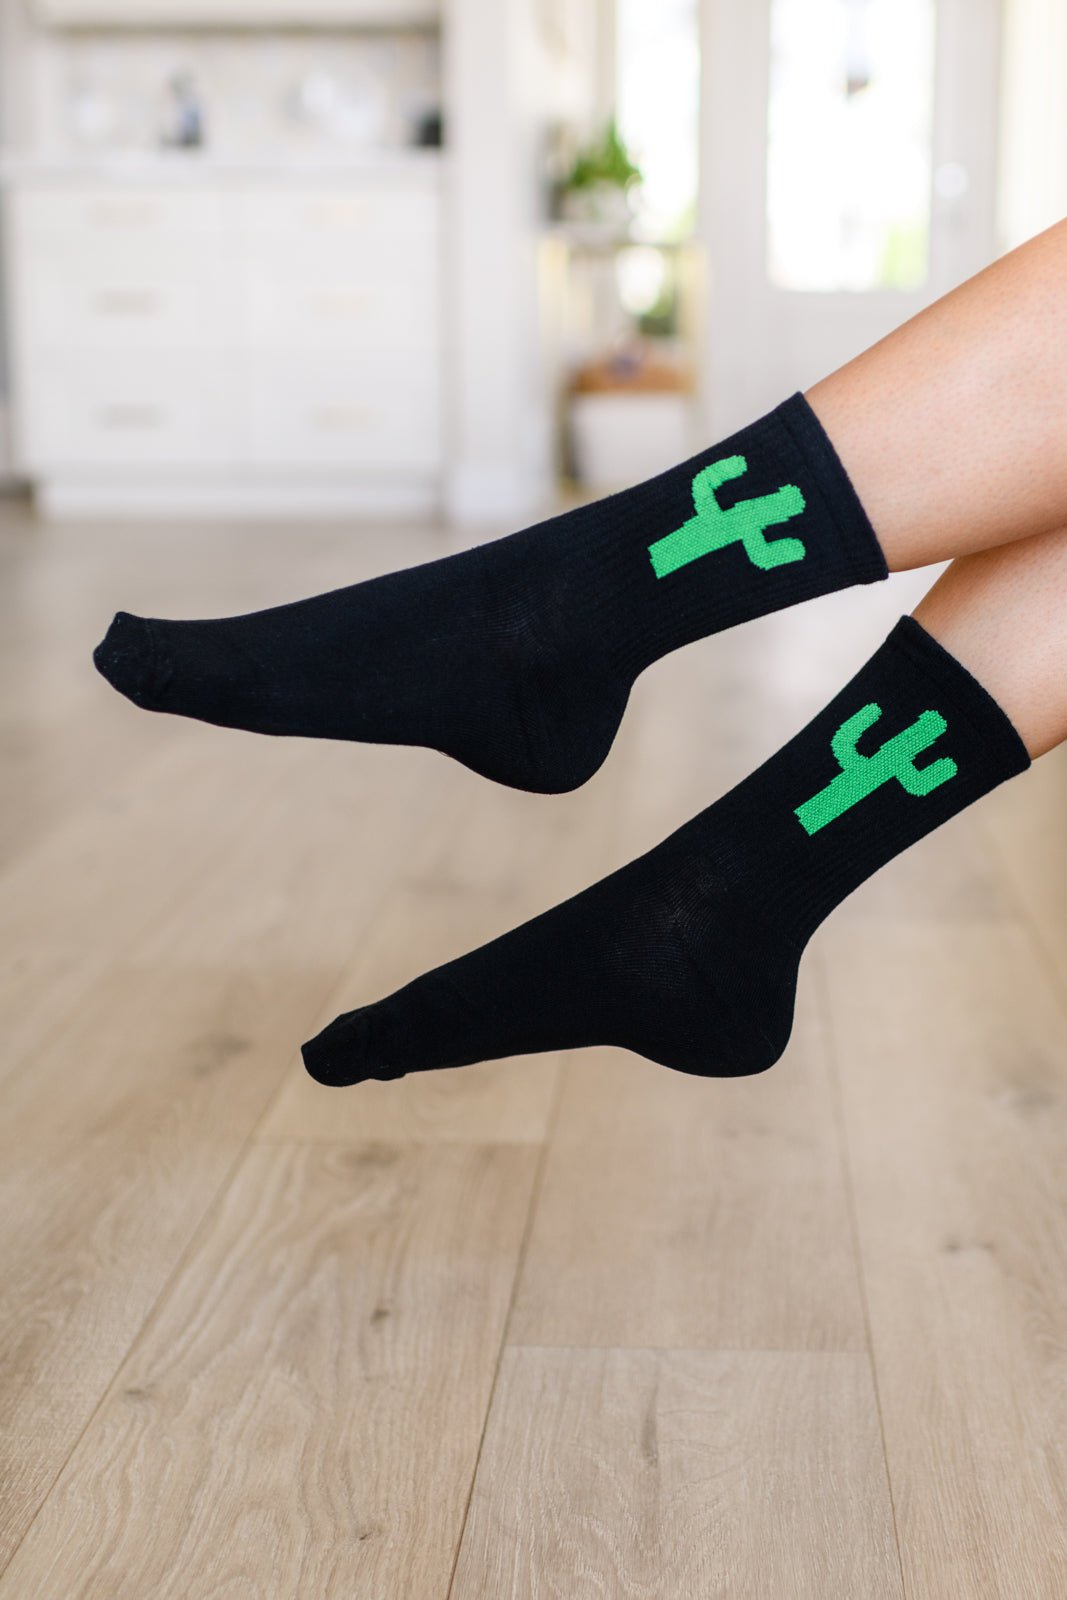 Sweet Socks Cactus - Happily Ever Atchison Shop Co.